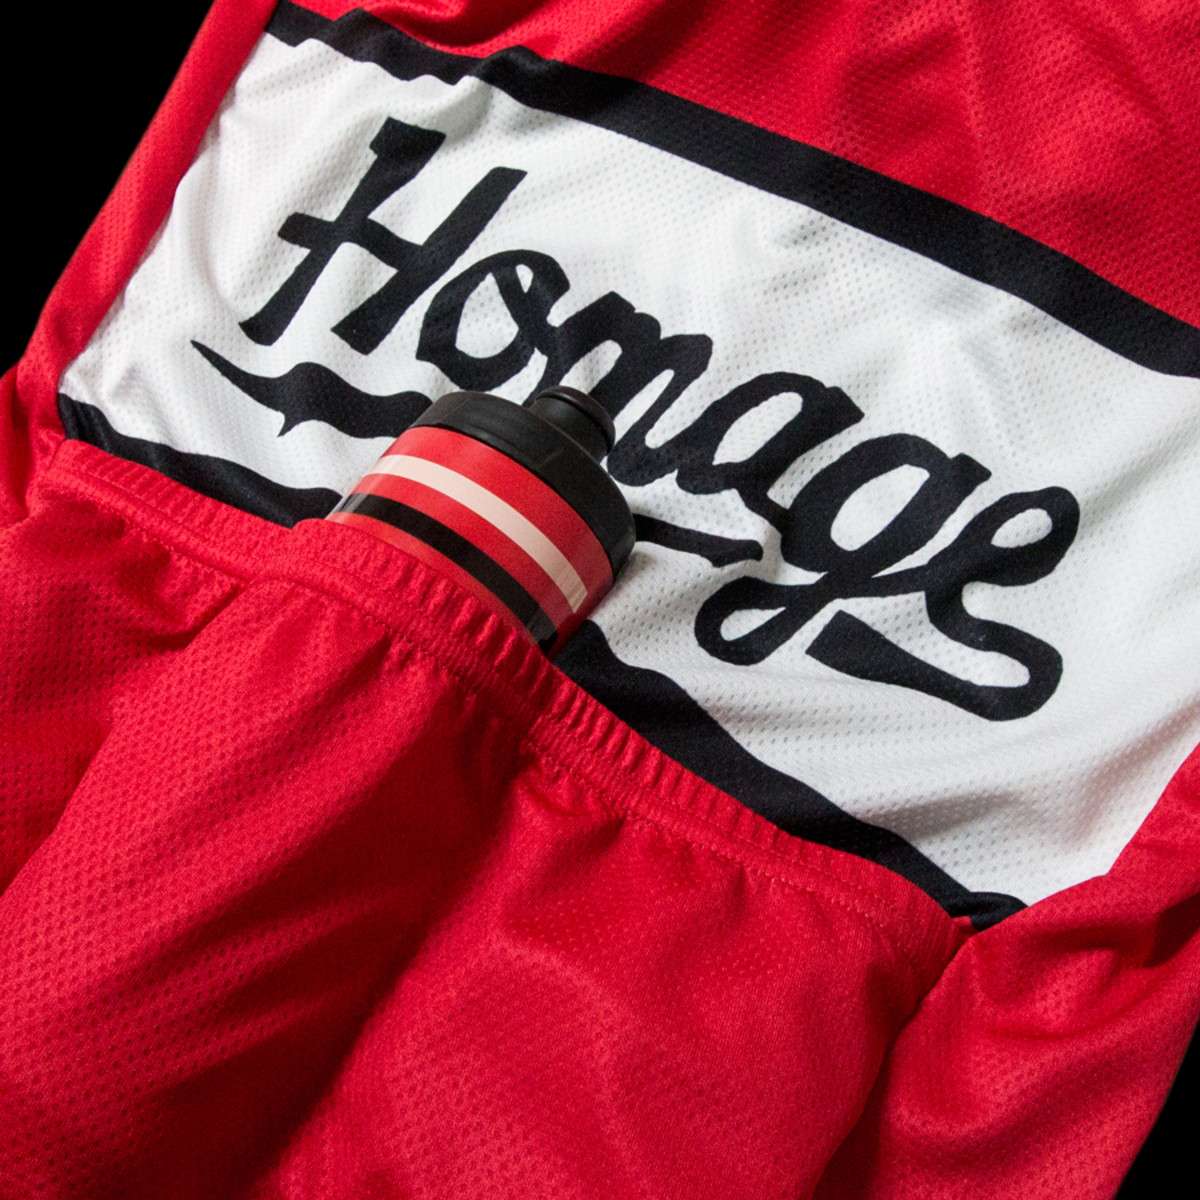 HOMAGE_CYCLING_JERSEY_DETAIL